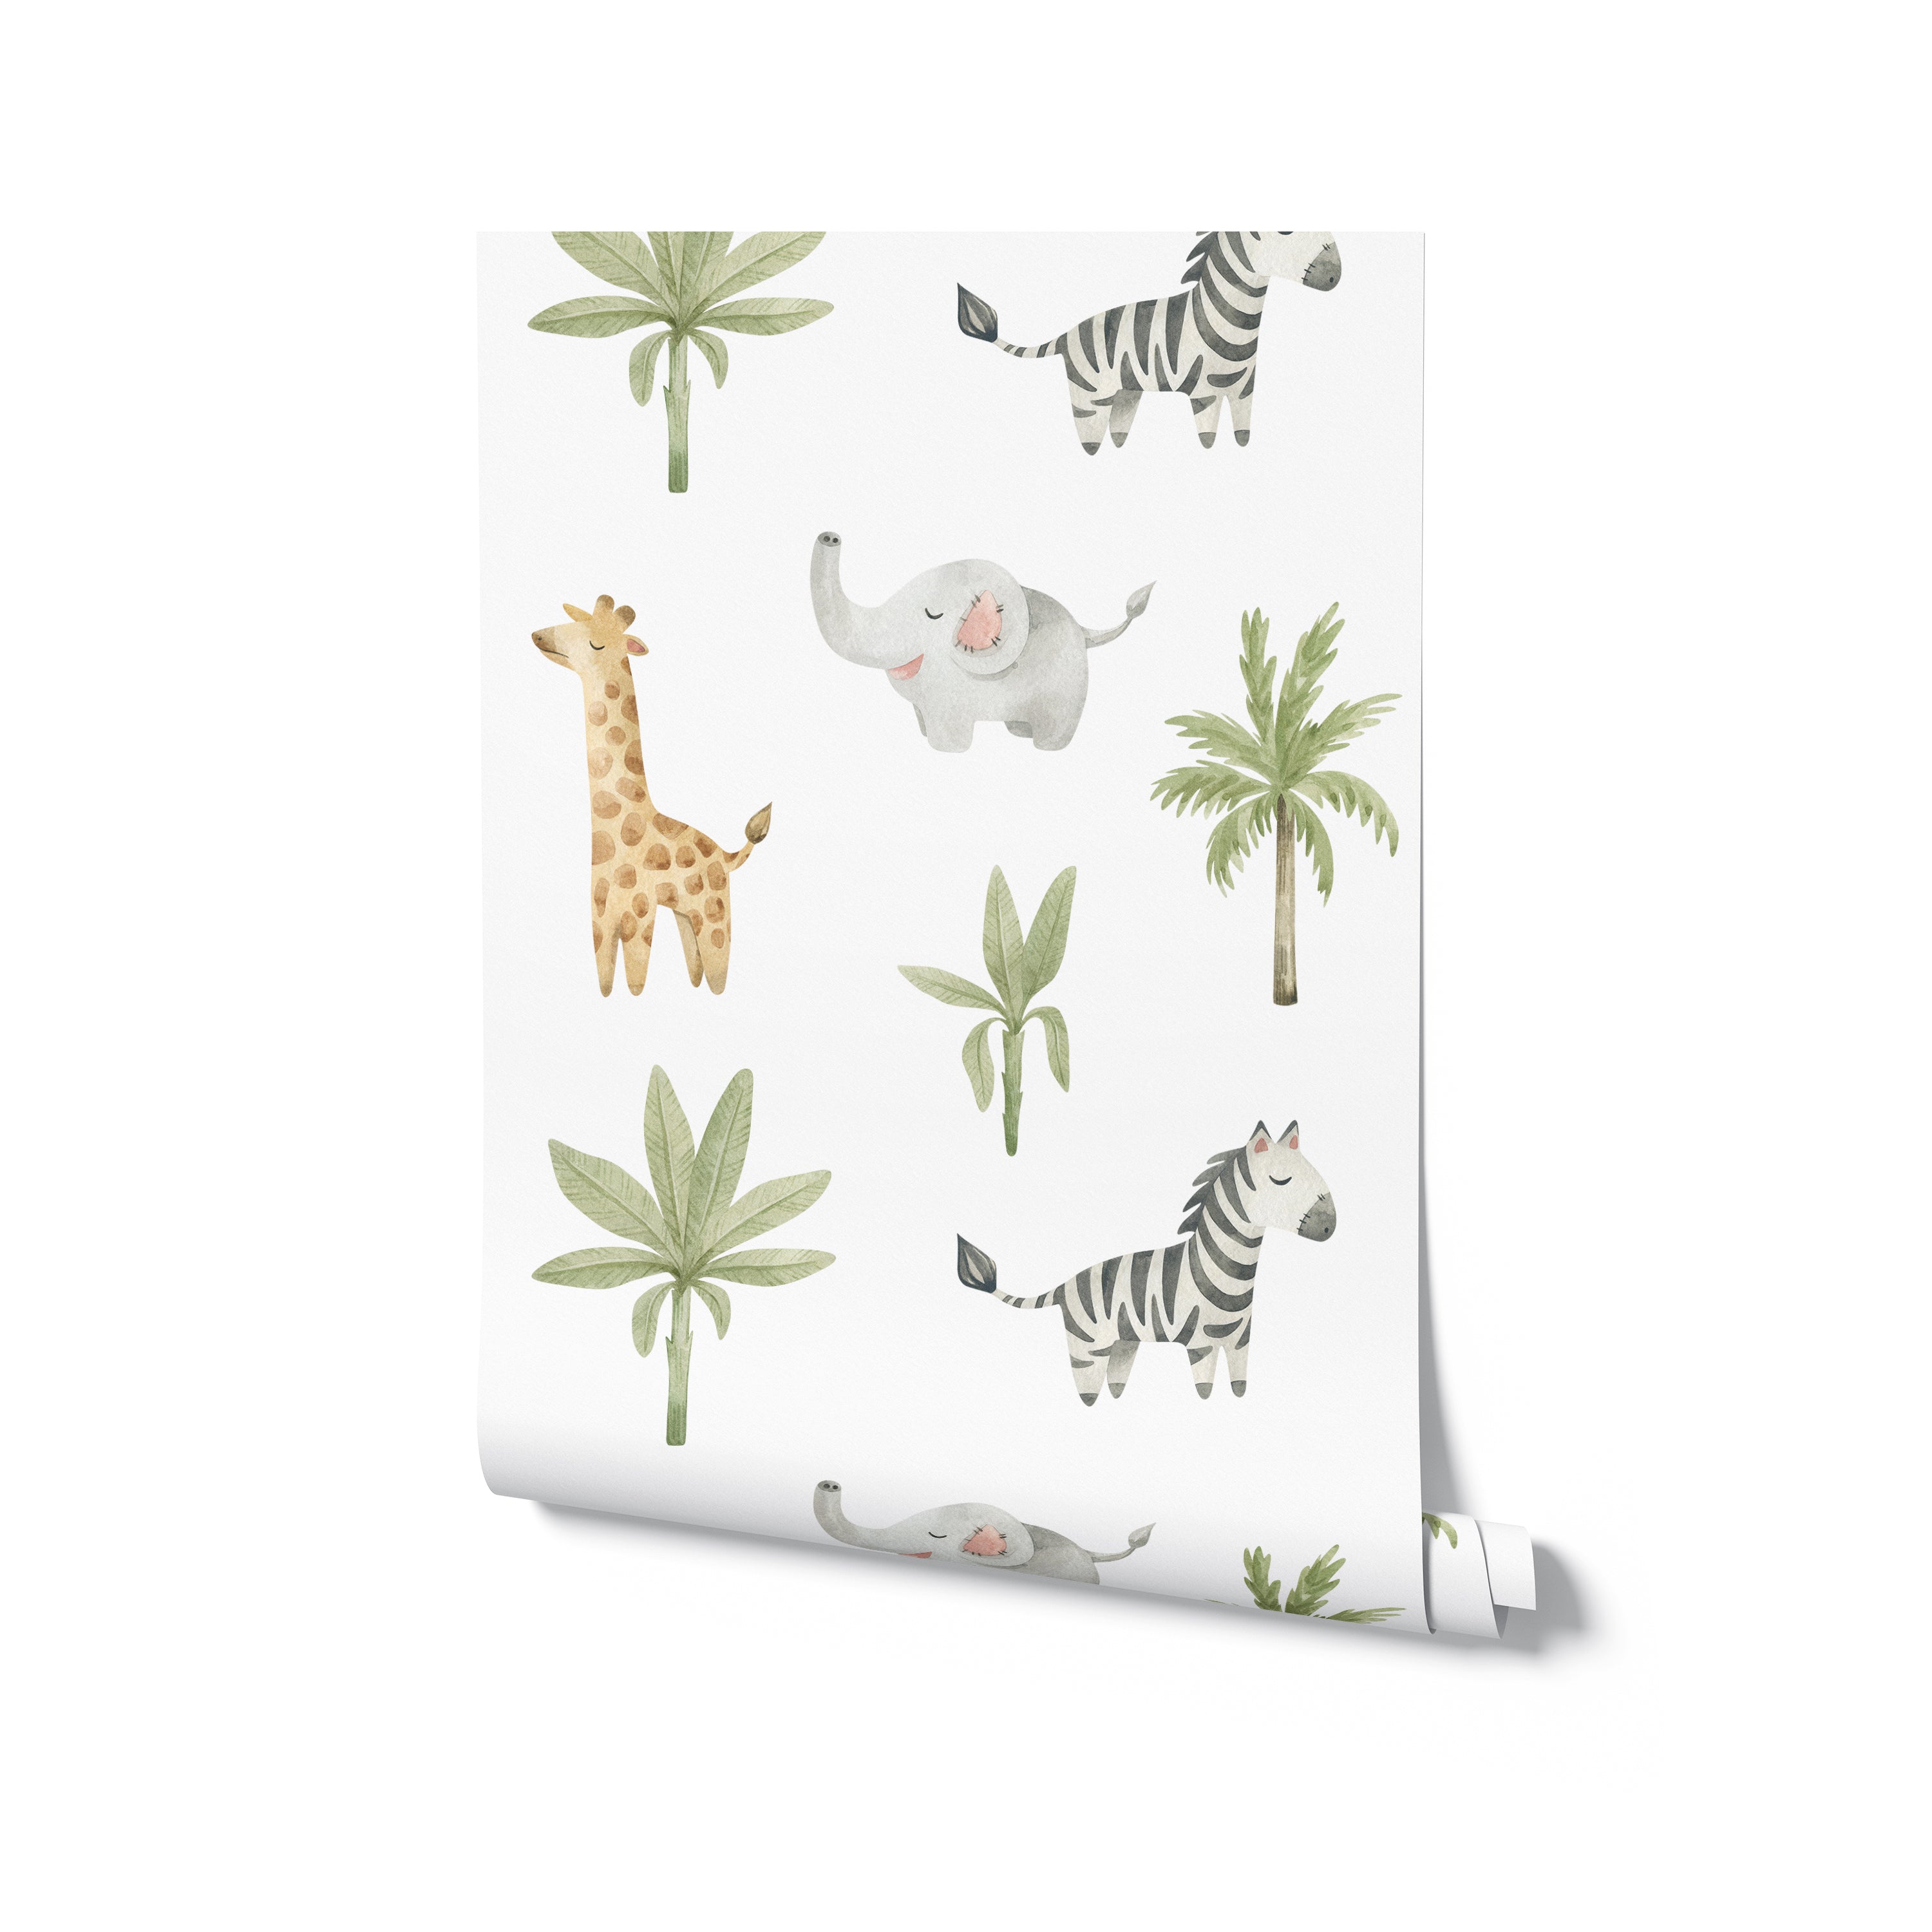 A roll of Jungle Animal Nursery Wallpaper showcases a charming array of watercolor safari animals and greenery, perfect for adding a joyful touch to children’s rooms.